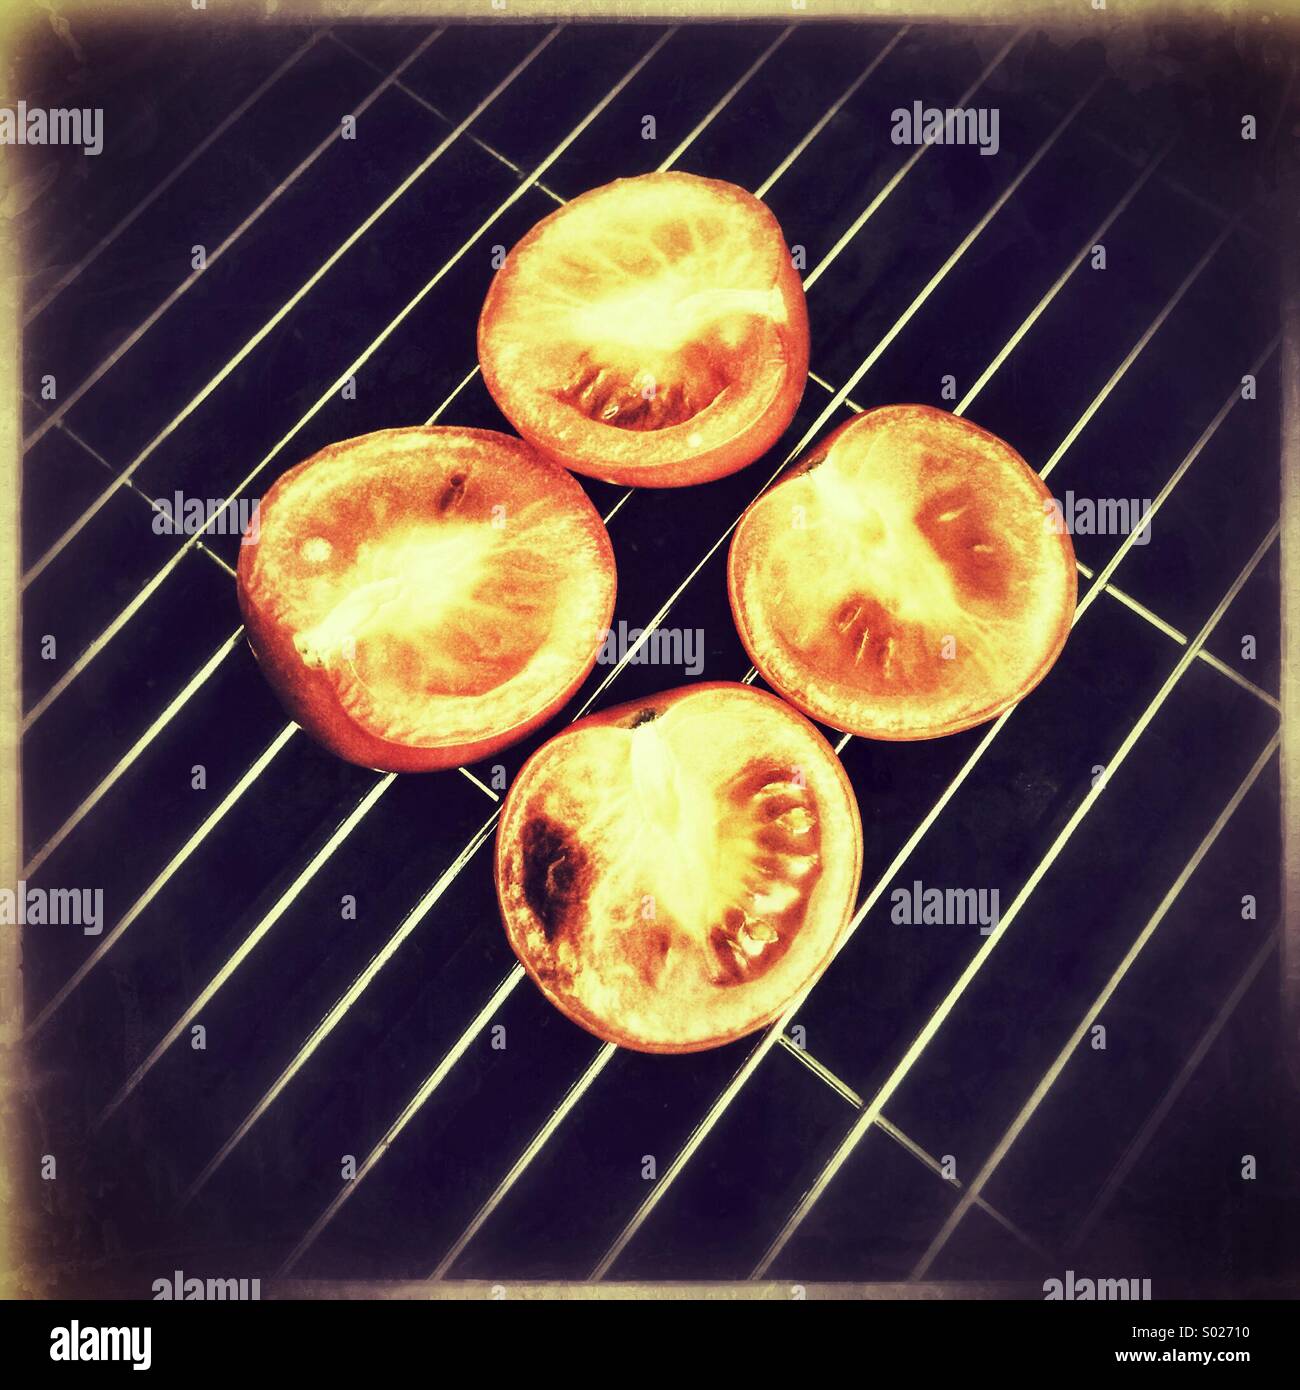 Tomatoes on grill pan Stock Photo